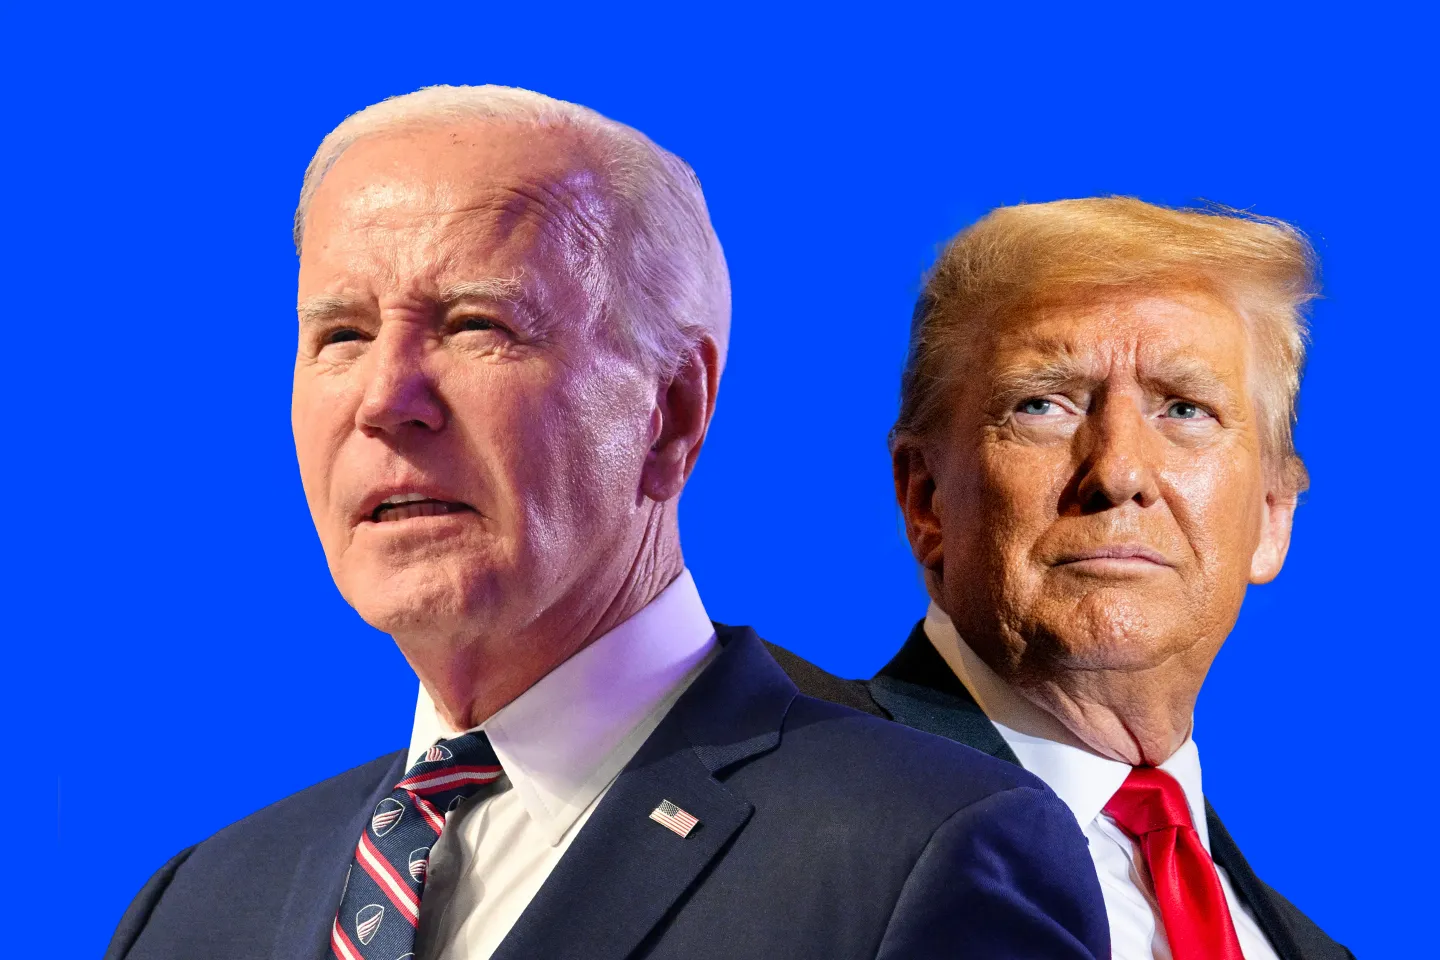 Many are calling for 81-year-old President Joe Biden to step down. Among this group of Fortune 500 CEOs, he’s still a young man